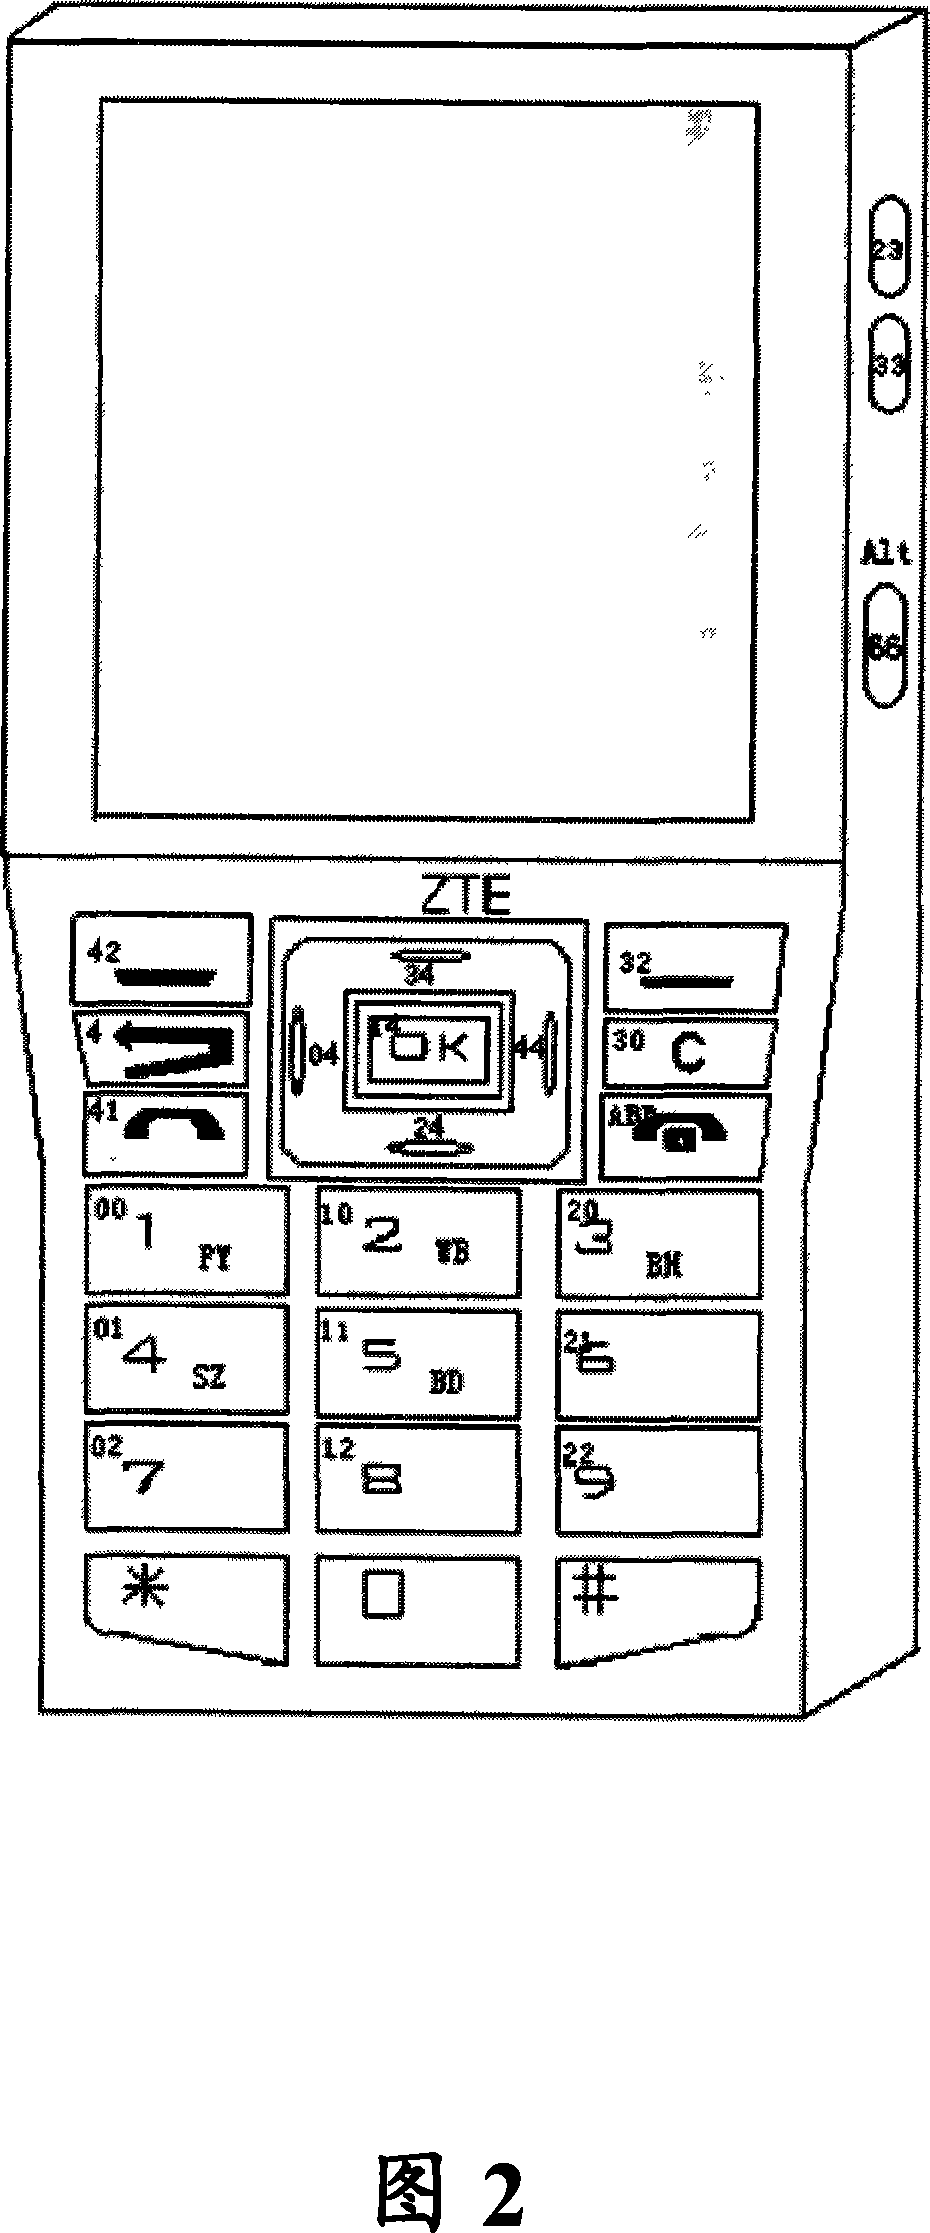 Method of performing input mode selection on mobile terminal